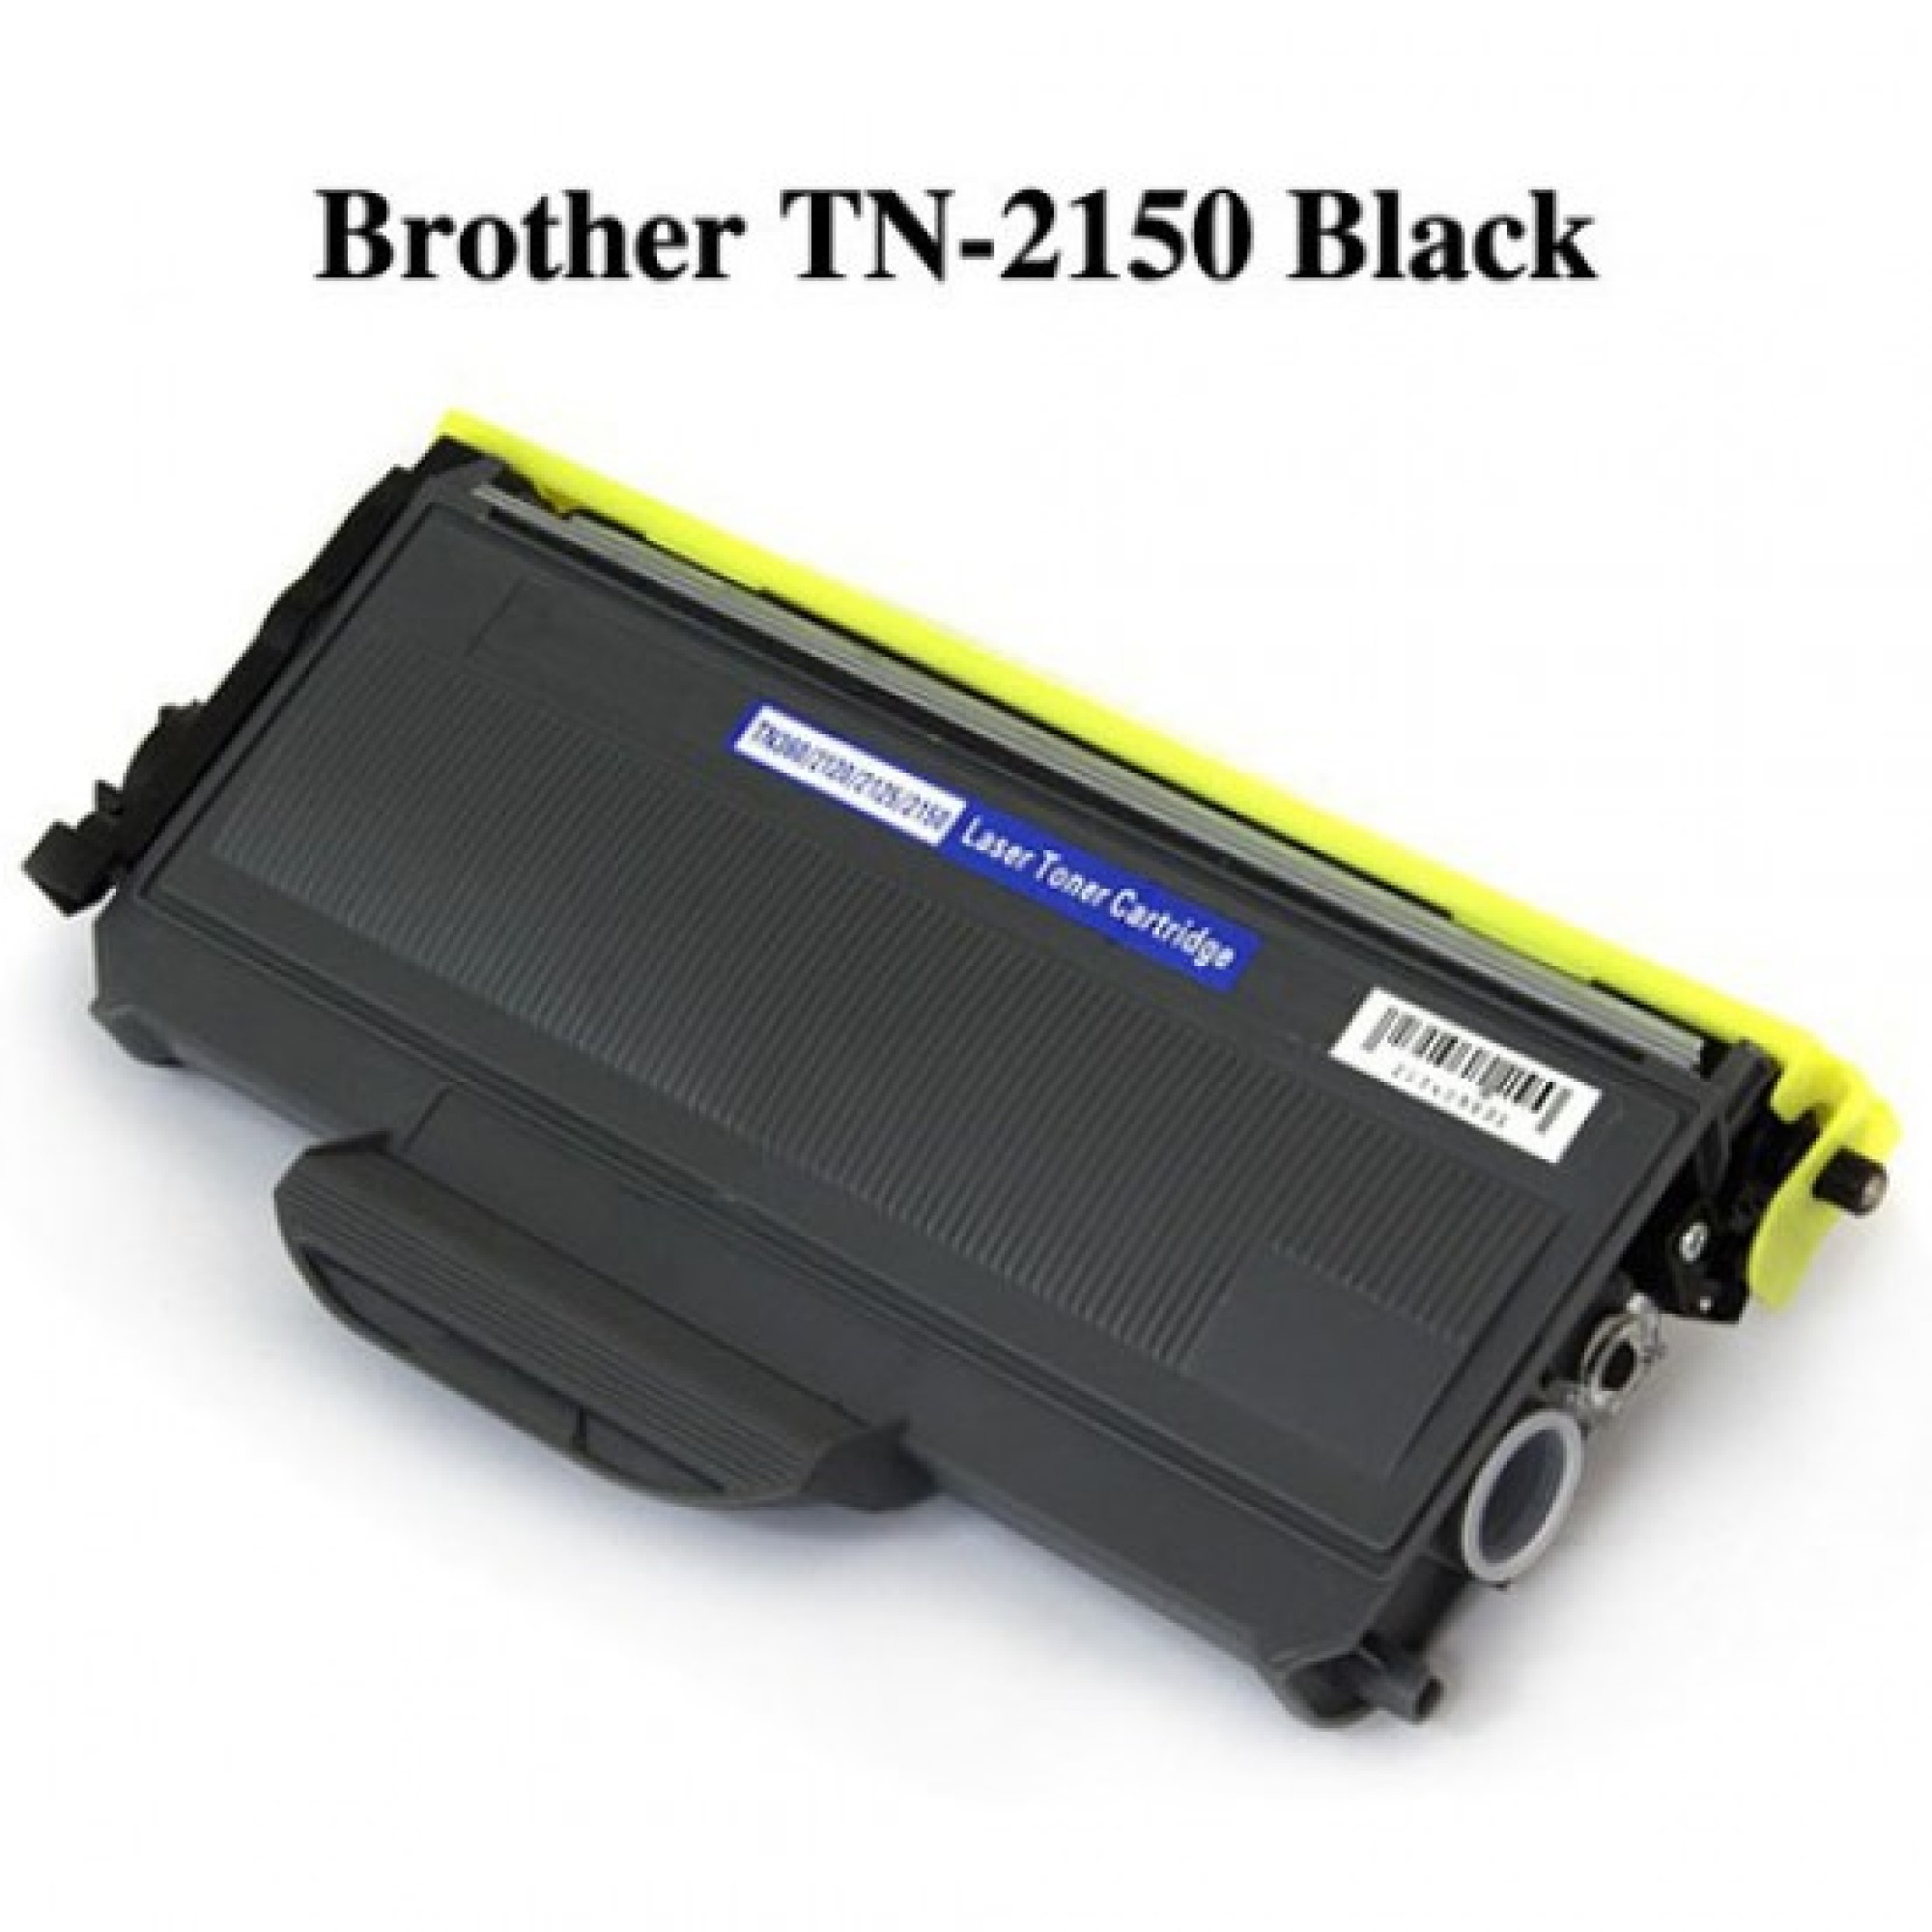 Tn2150 Cartridge for copy printer Brother MFC 7340